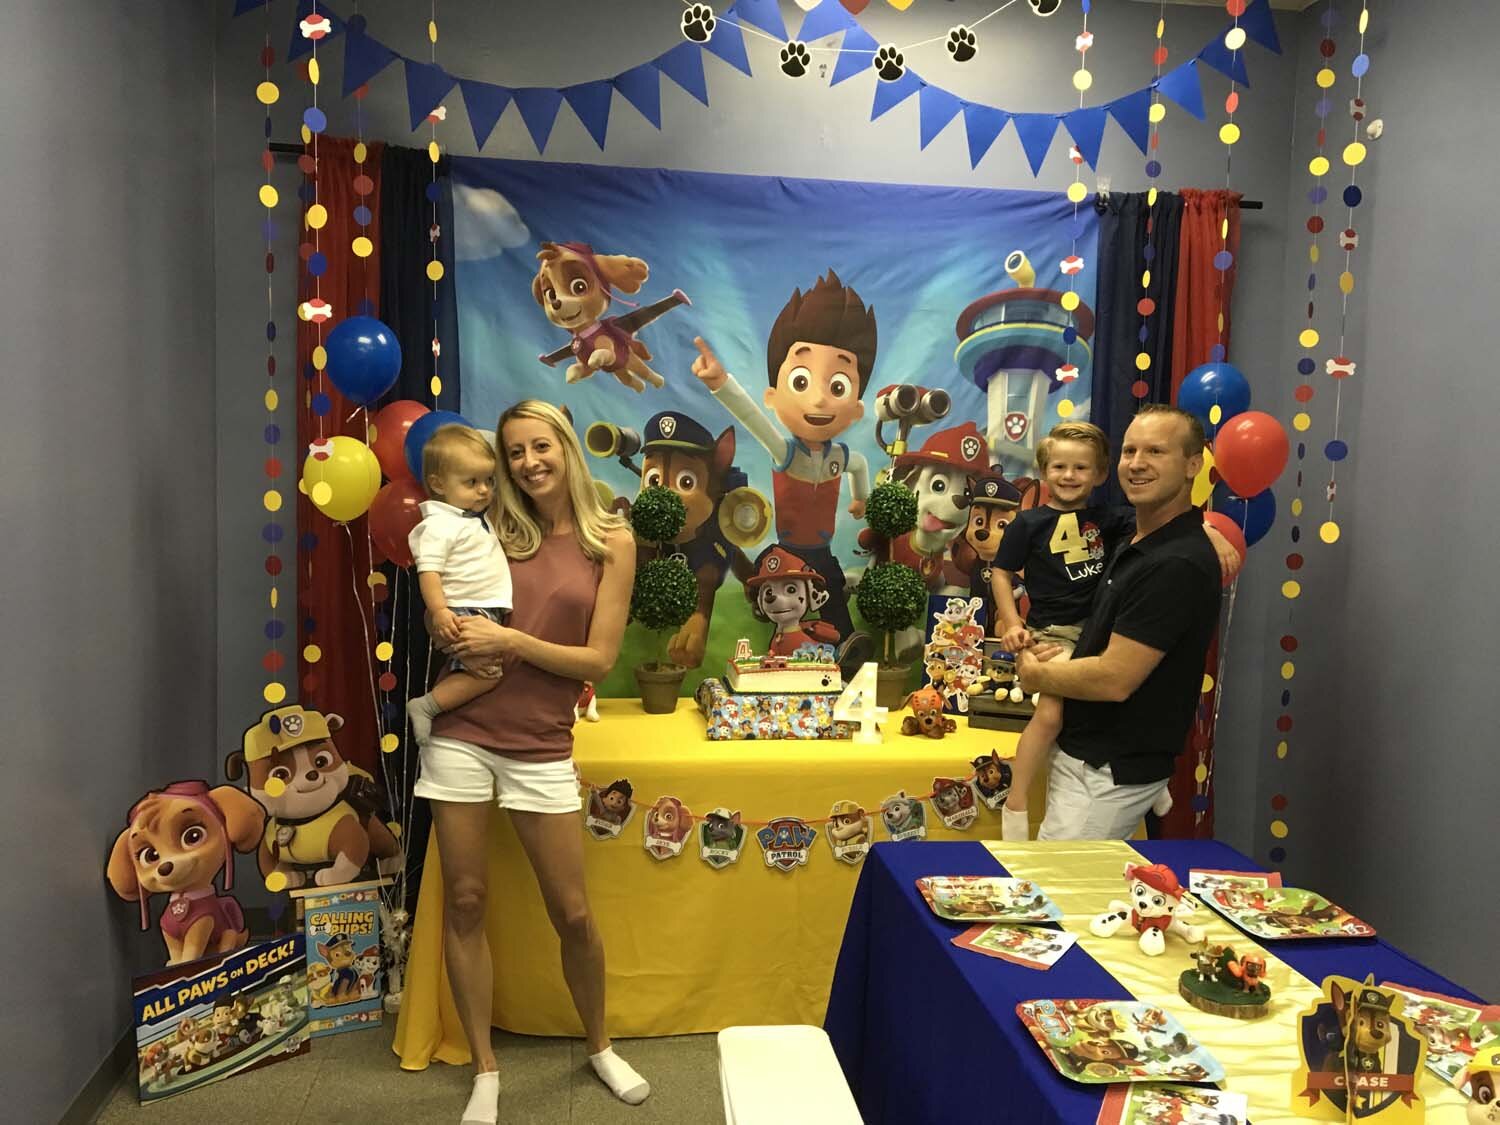 Paw Patrol Themed Party For 4 Year Old Birthday Boy 